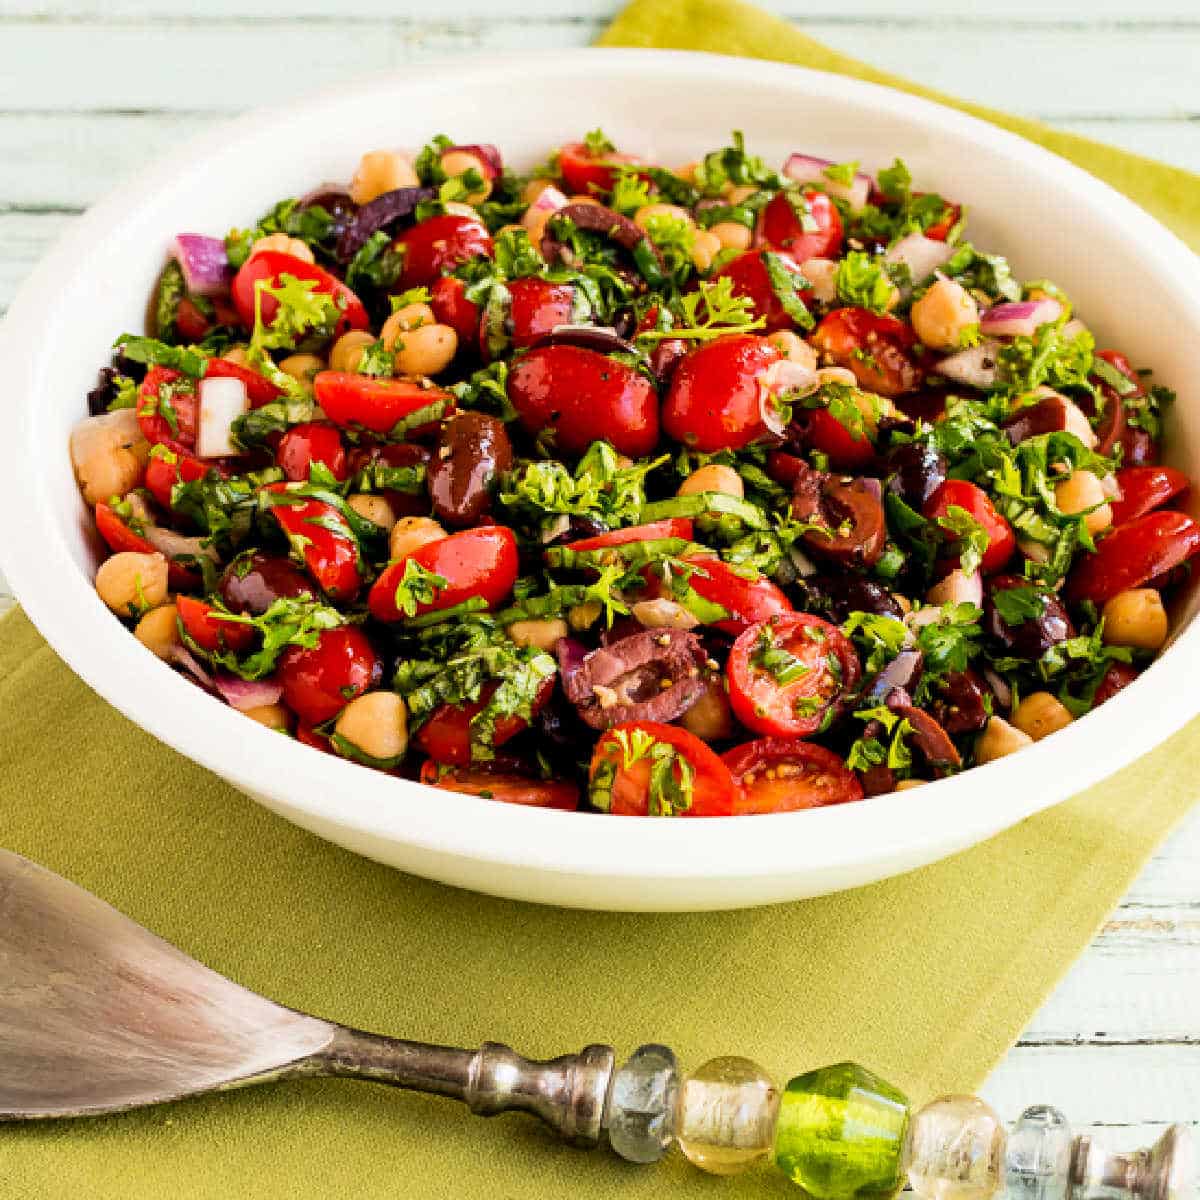 Chickpea Salad with Tomatoes and Olives shown in serving bowl.